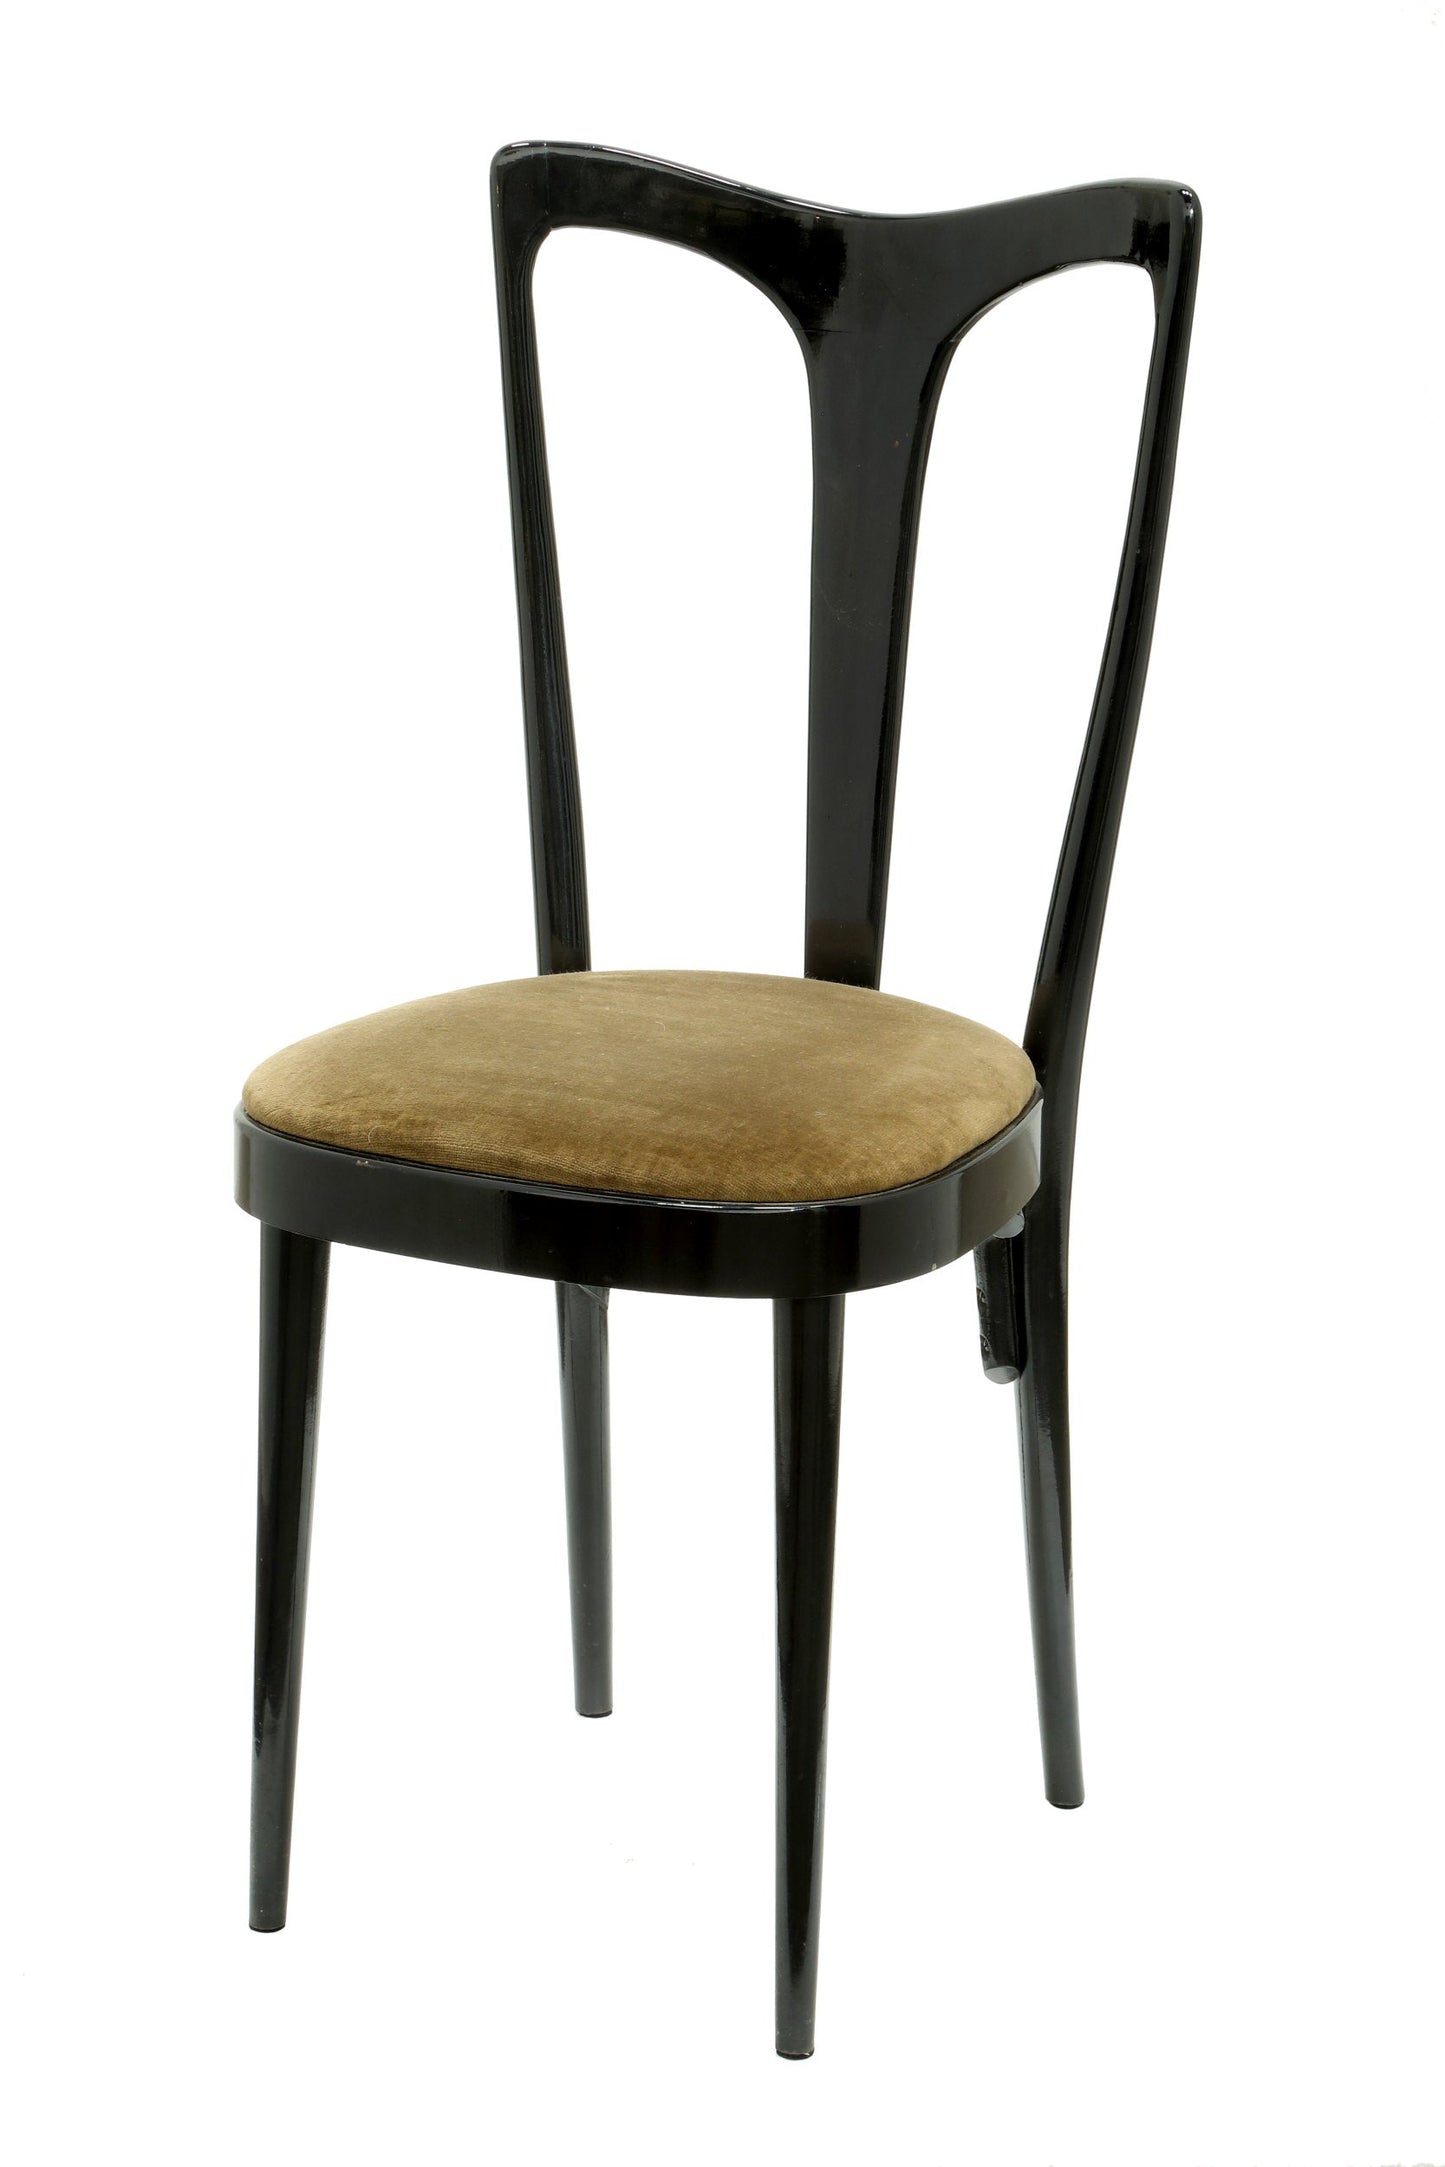 Six 1950s black lacquered chairs